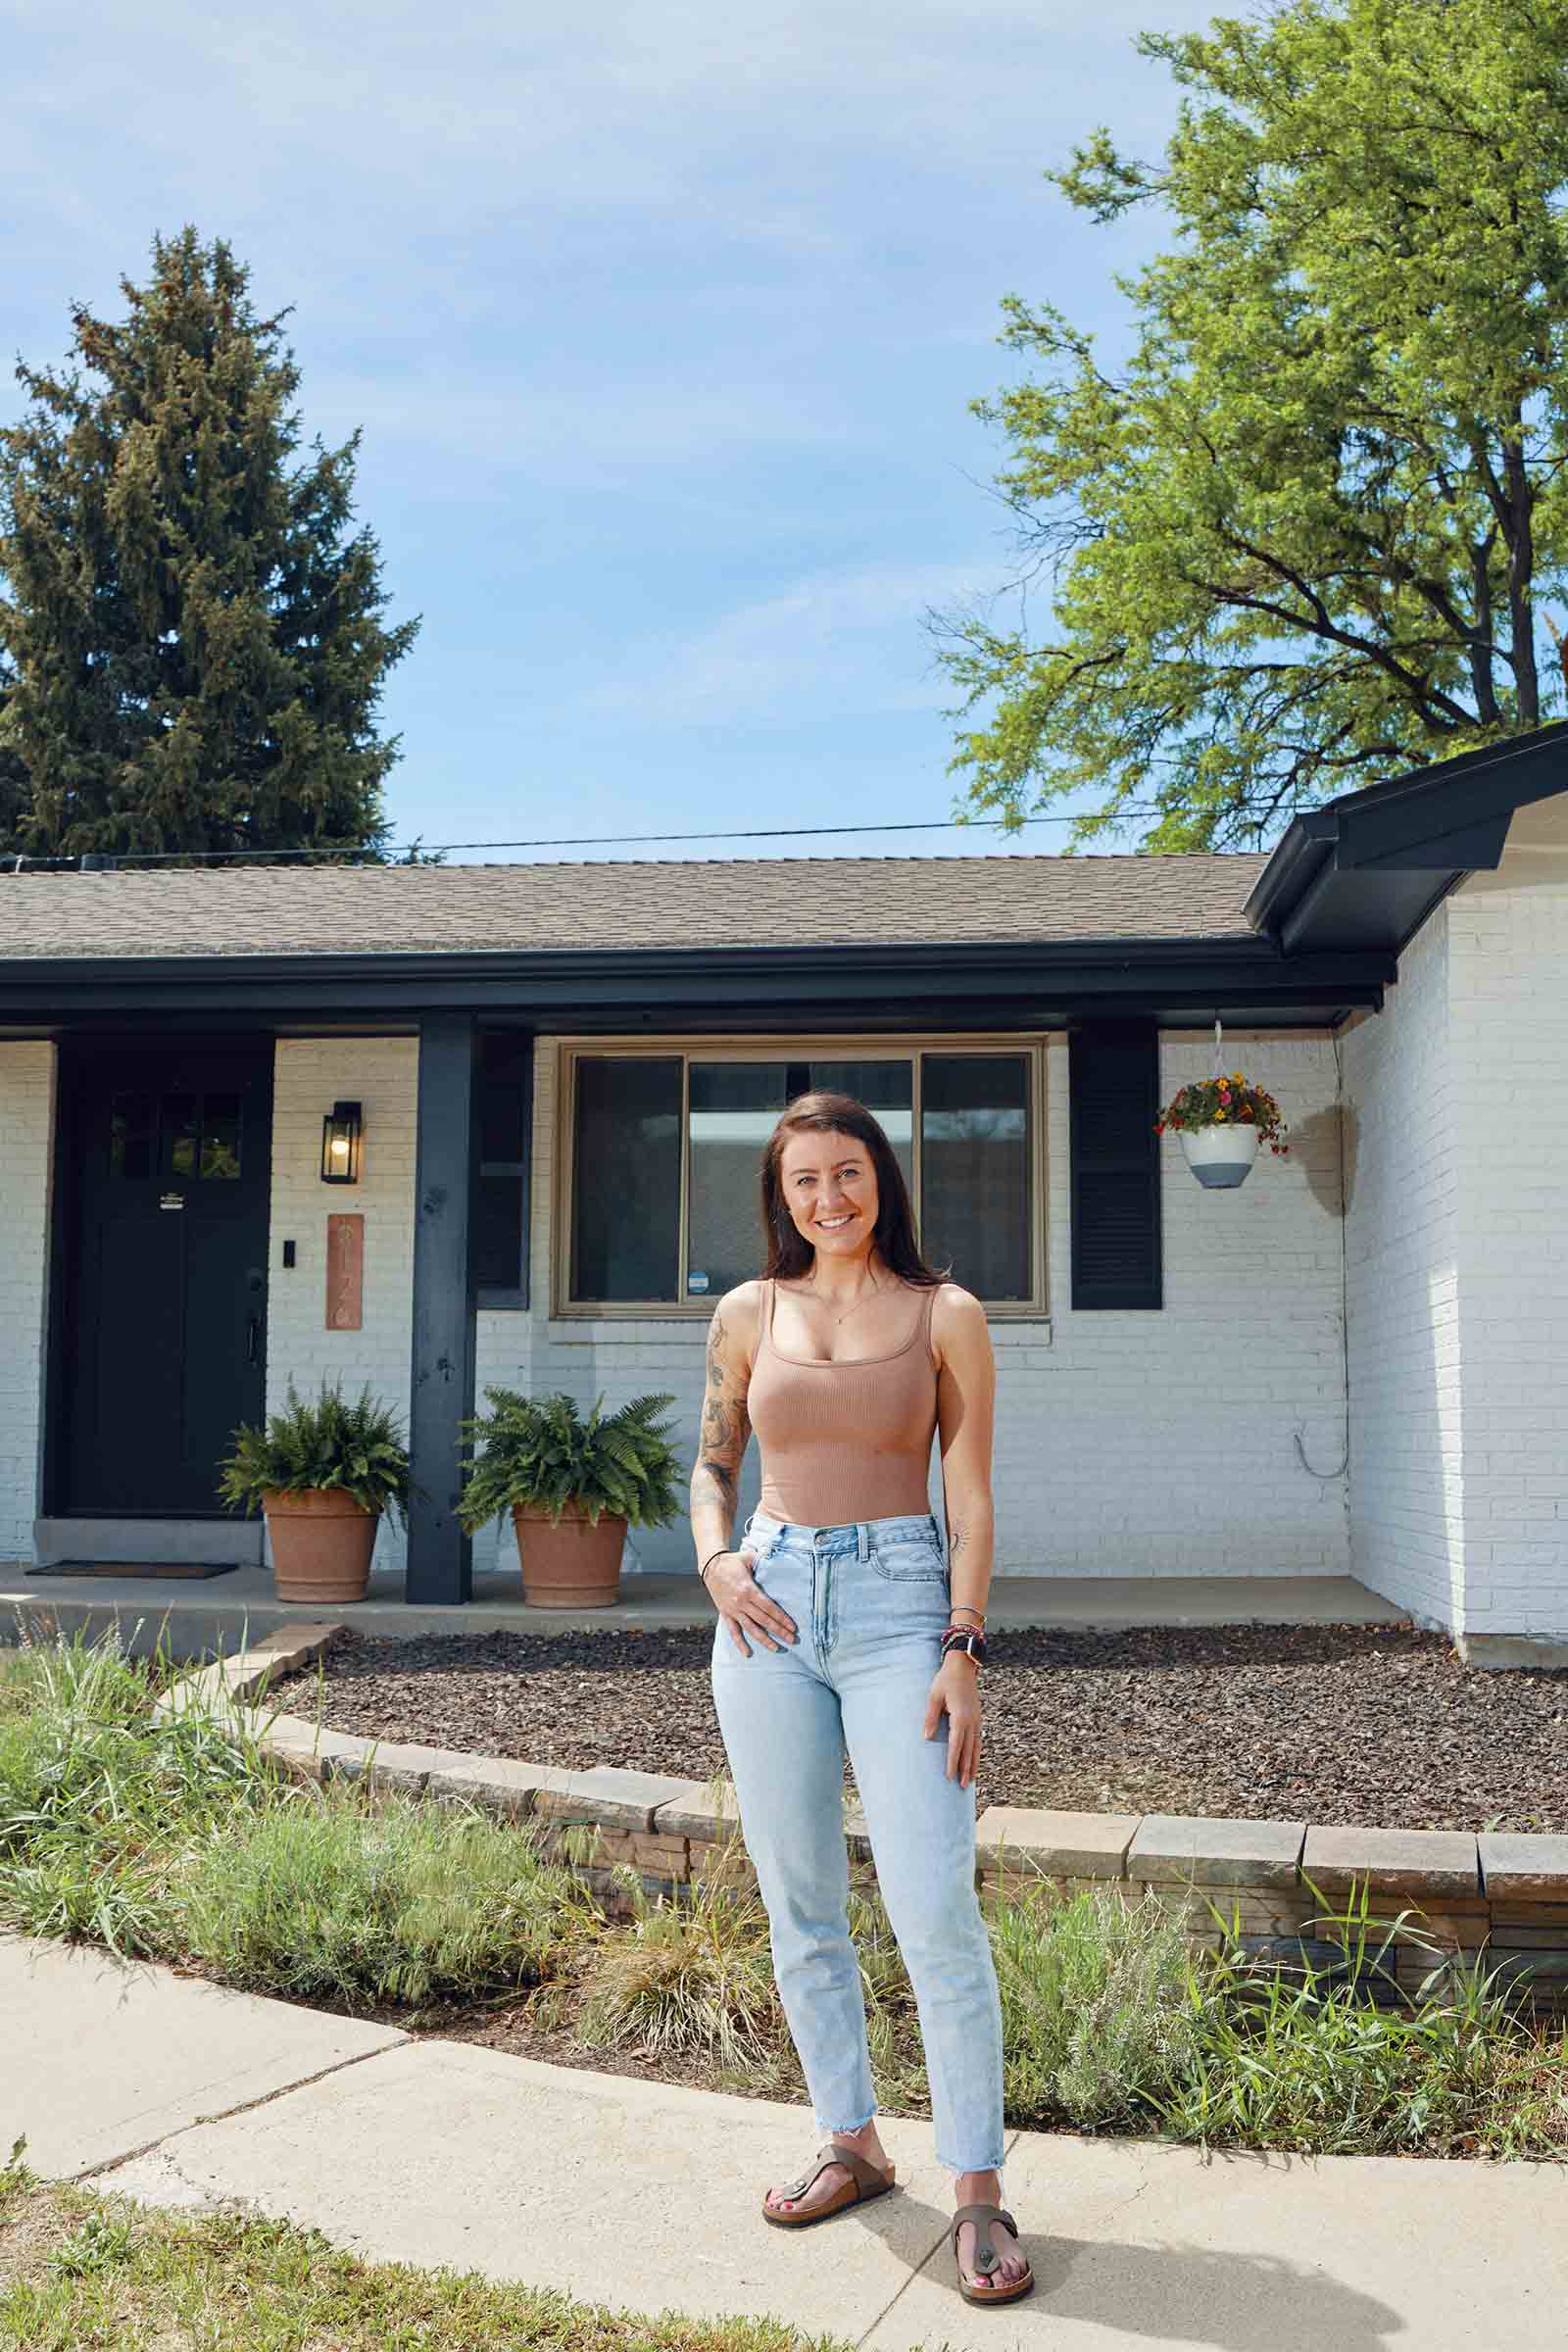 Hillary Horn photographed in front of her new home in Arvada, Colorado on 05/27/2022. Credit: Caleb Santiago Alvarado for Time Magazine.